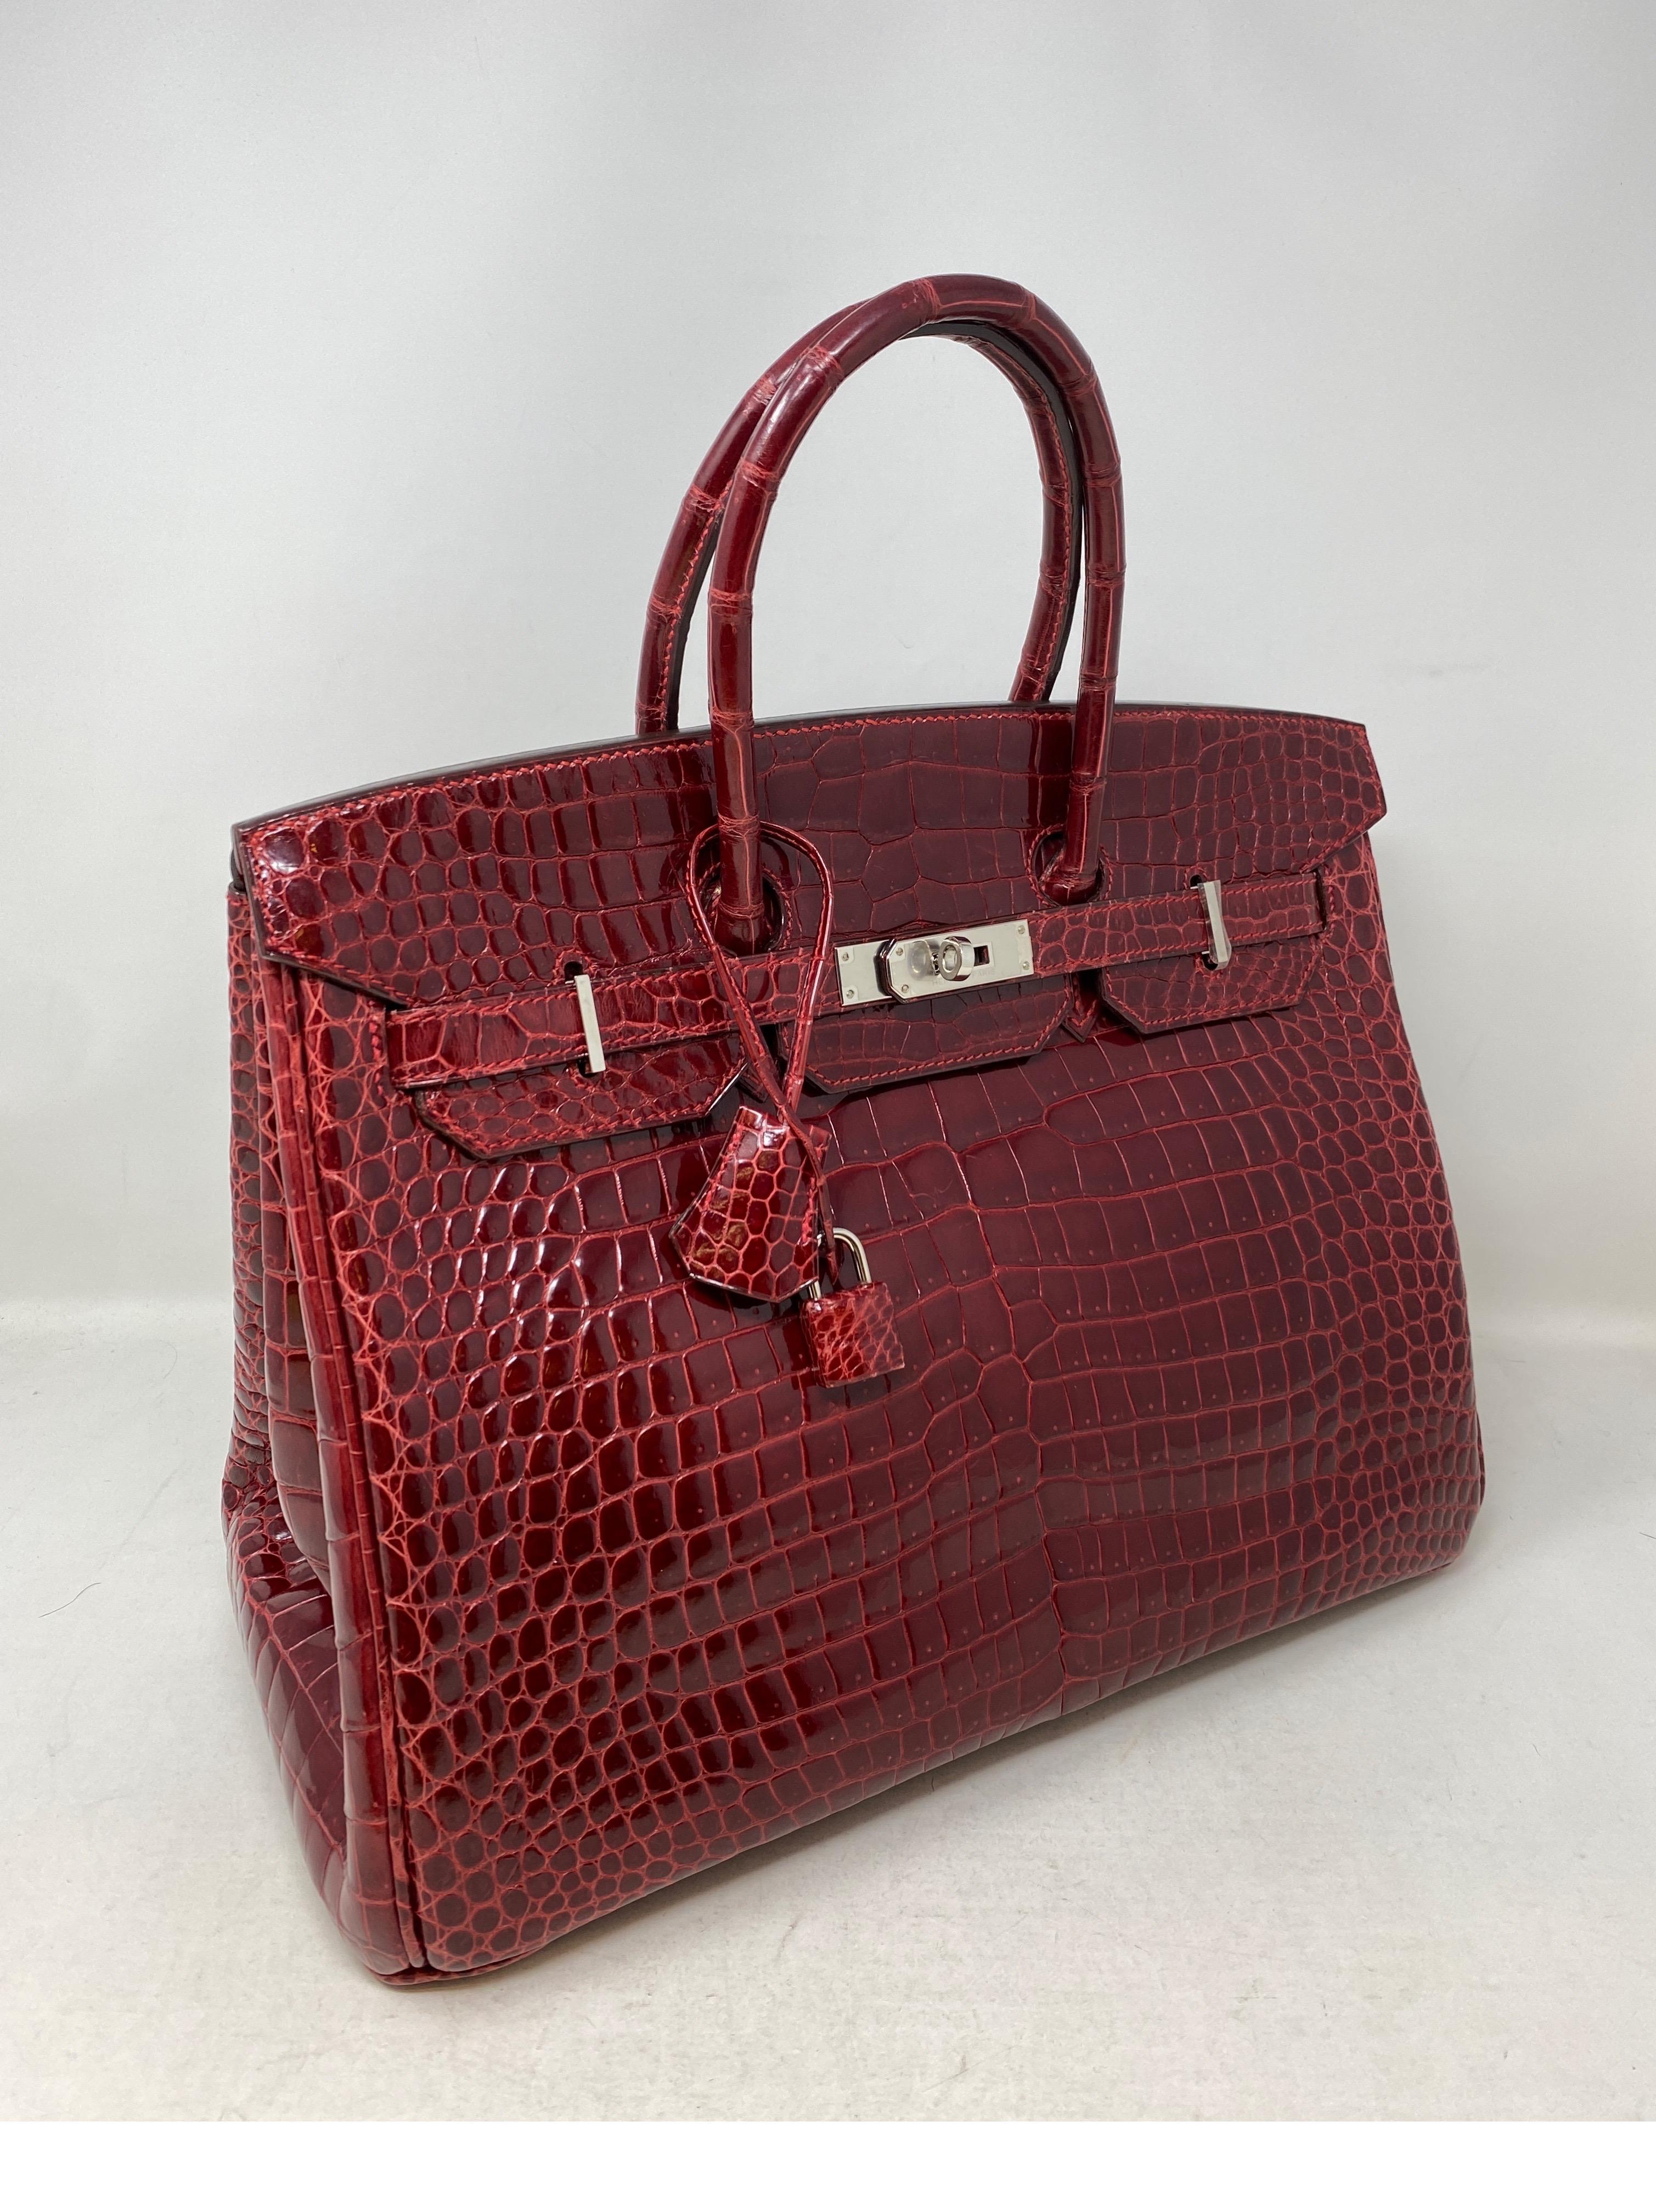 Hermes Rouge Shiny Porosus Crocodile Birkin 35 Bag. From 2011 O square stamp. Palladium hardware. Beautiful burgundy rouge color. Excellent condition. Stayed in the box. Porosus crocodile is the most luxurious exotic skin from Hermes. Created by